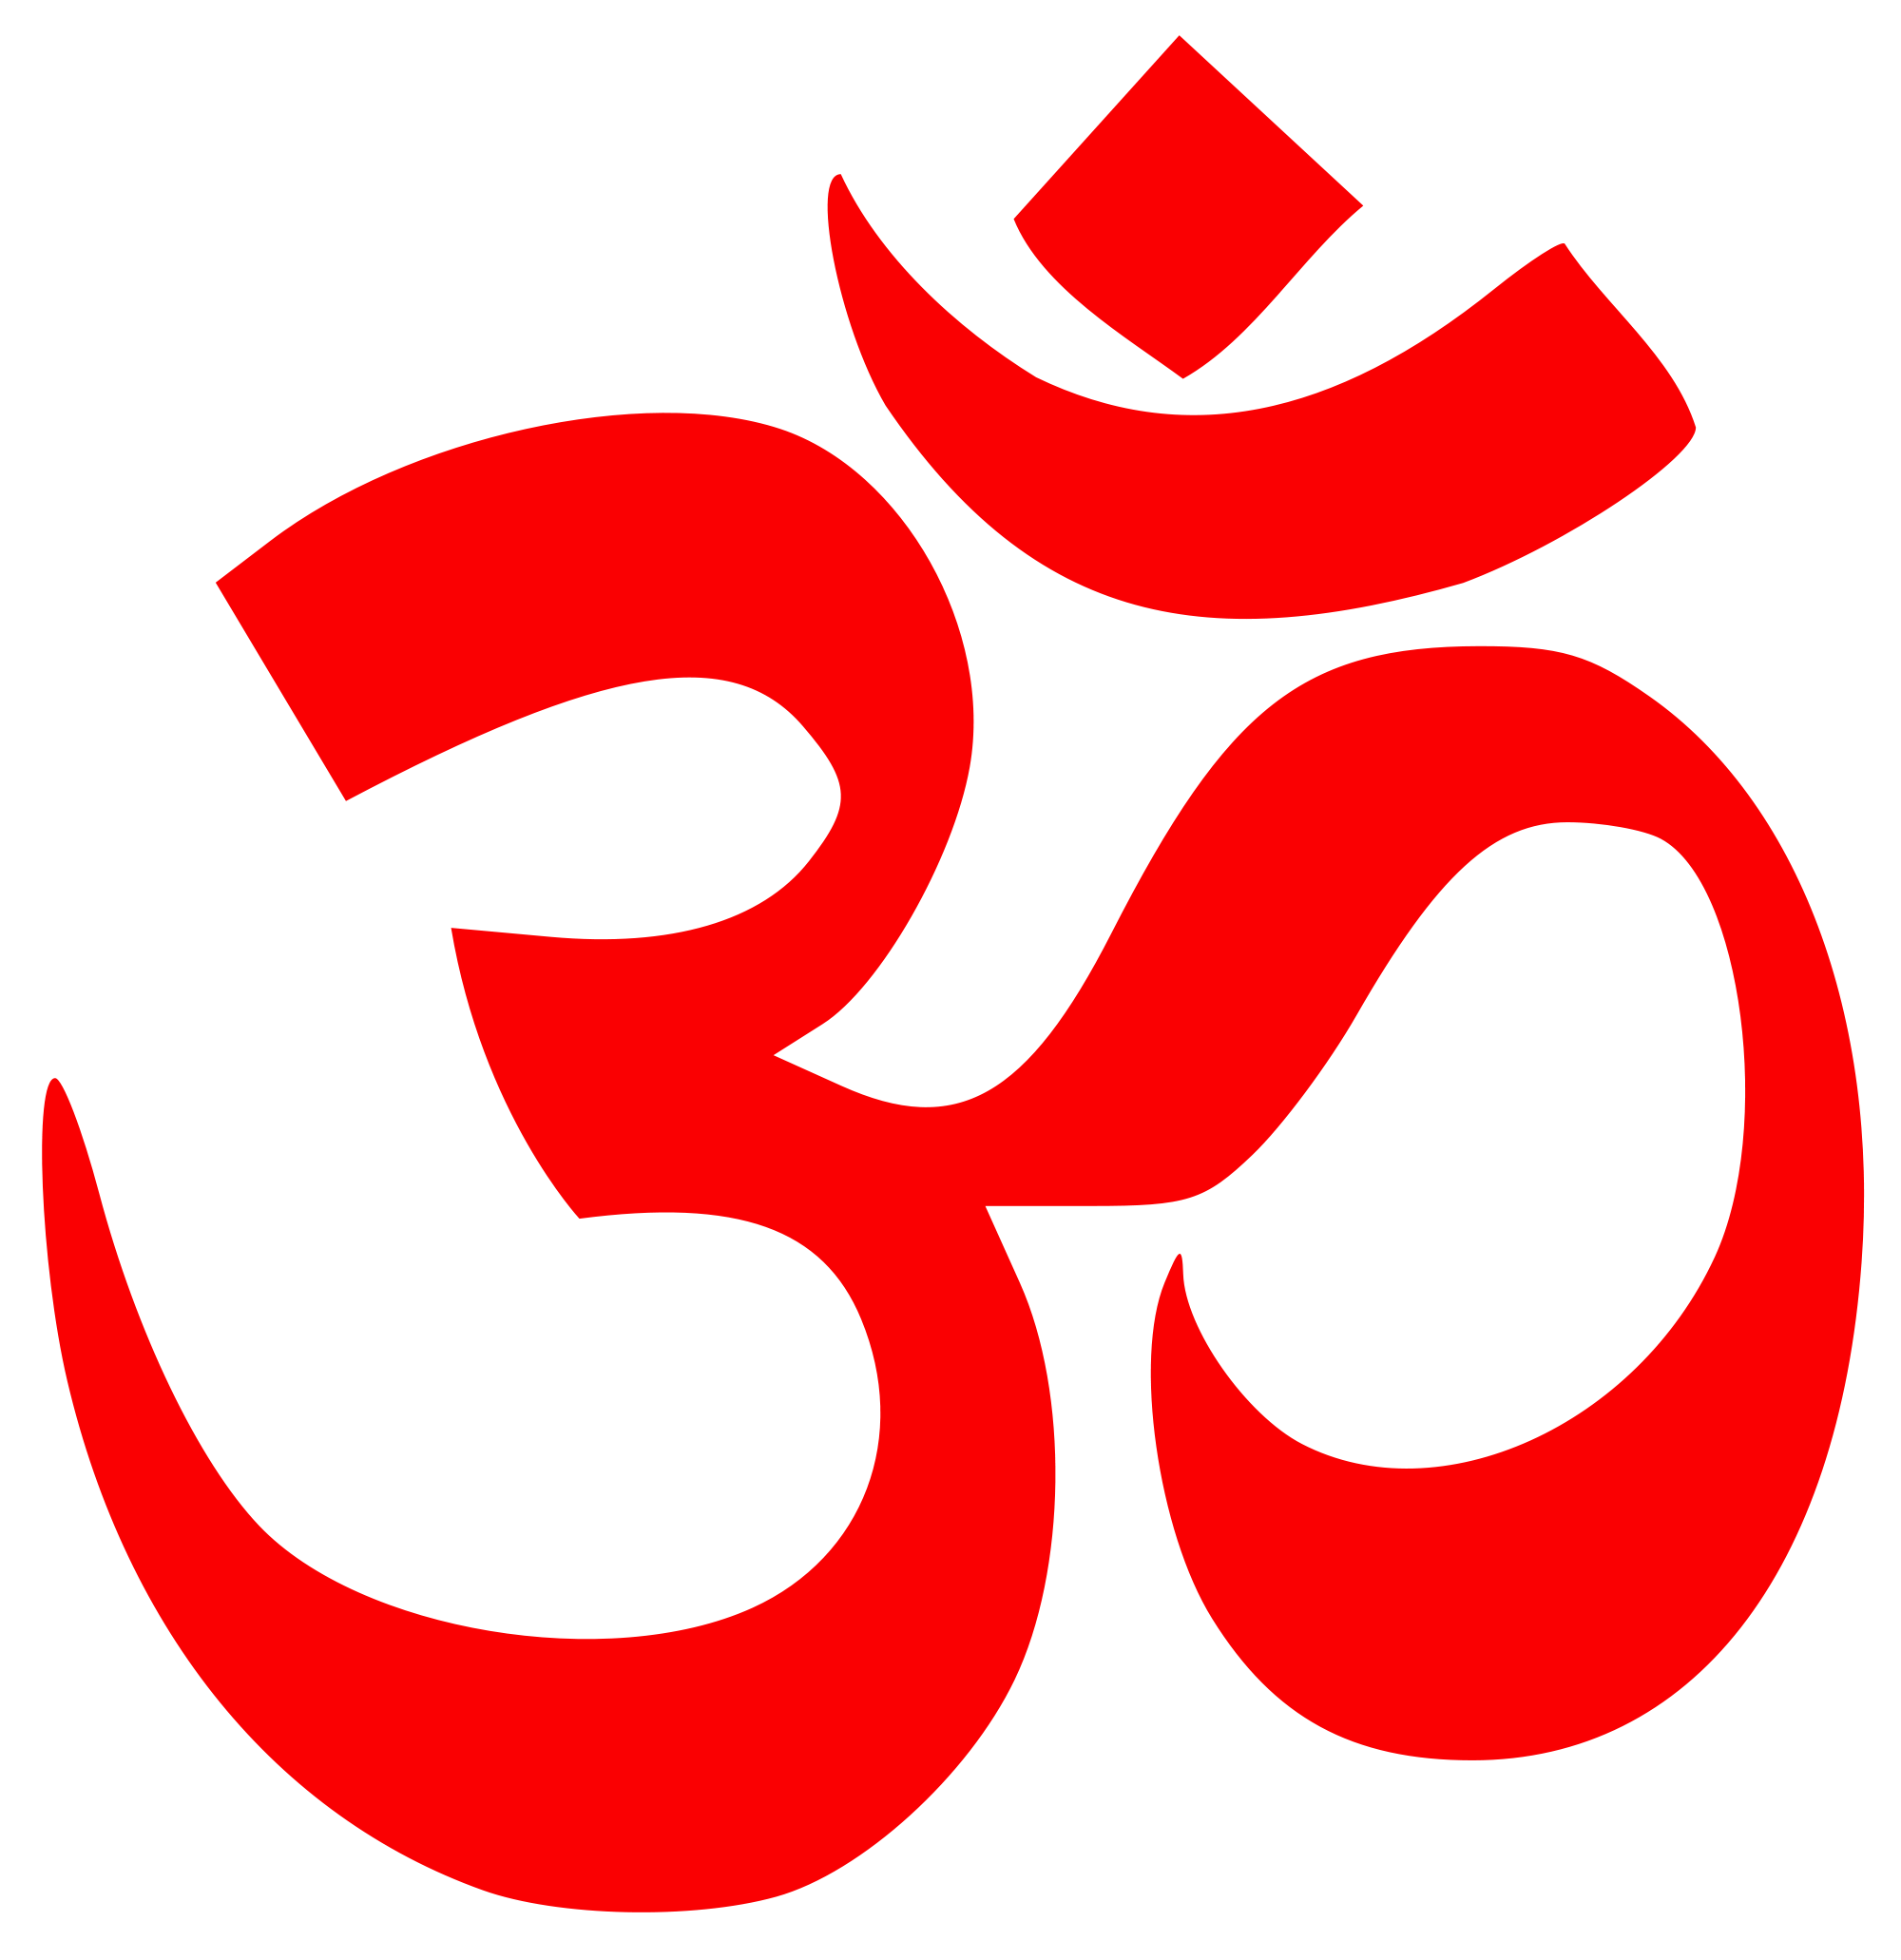 what does the number 7 mean in hinduism